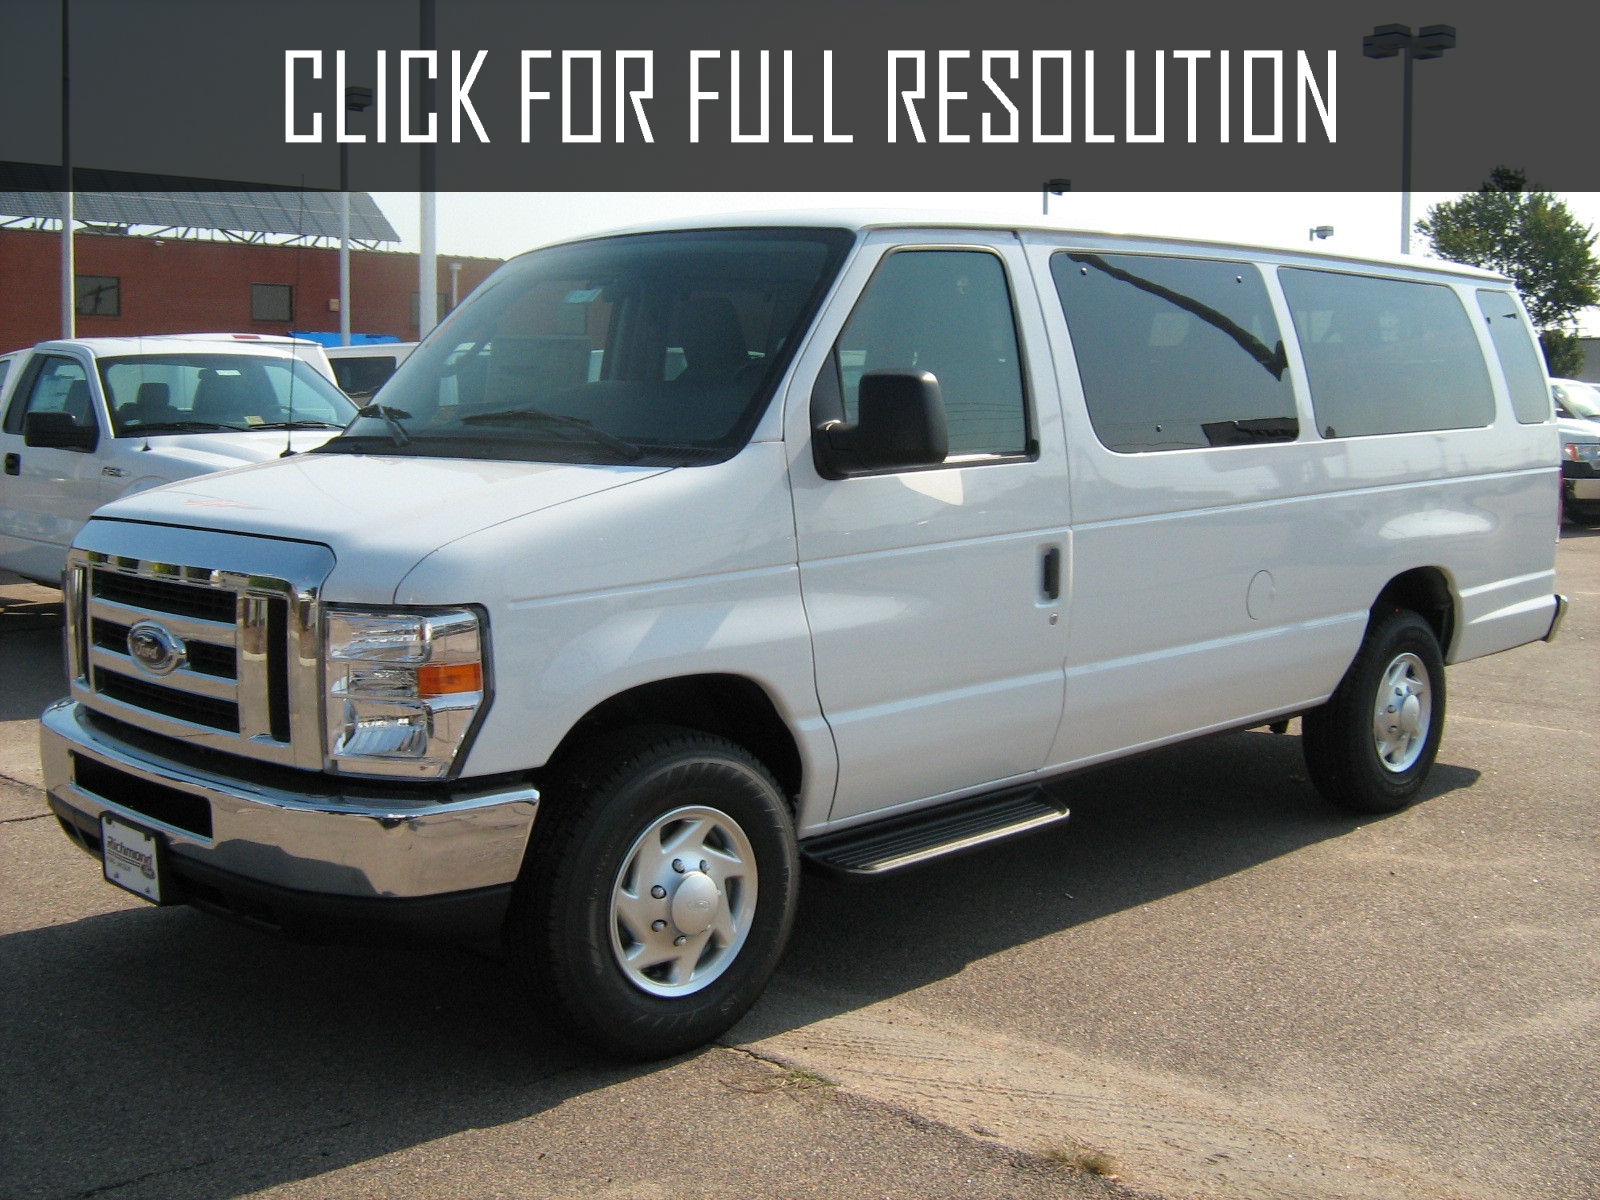 2013 Ford E350 Best Image Gallery 12 14 Share And Download